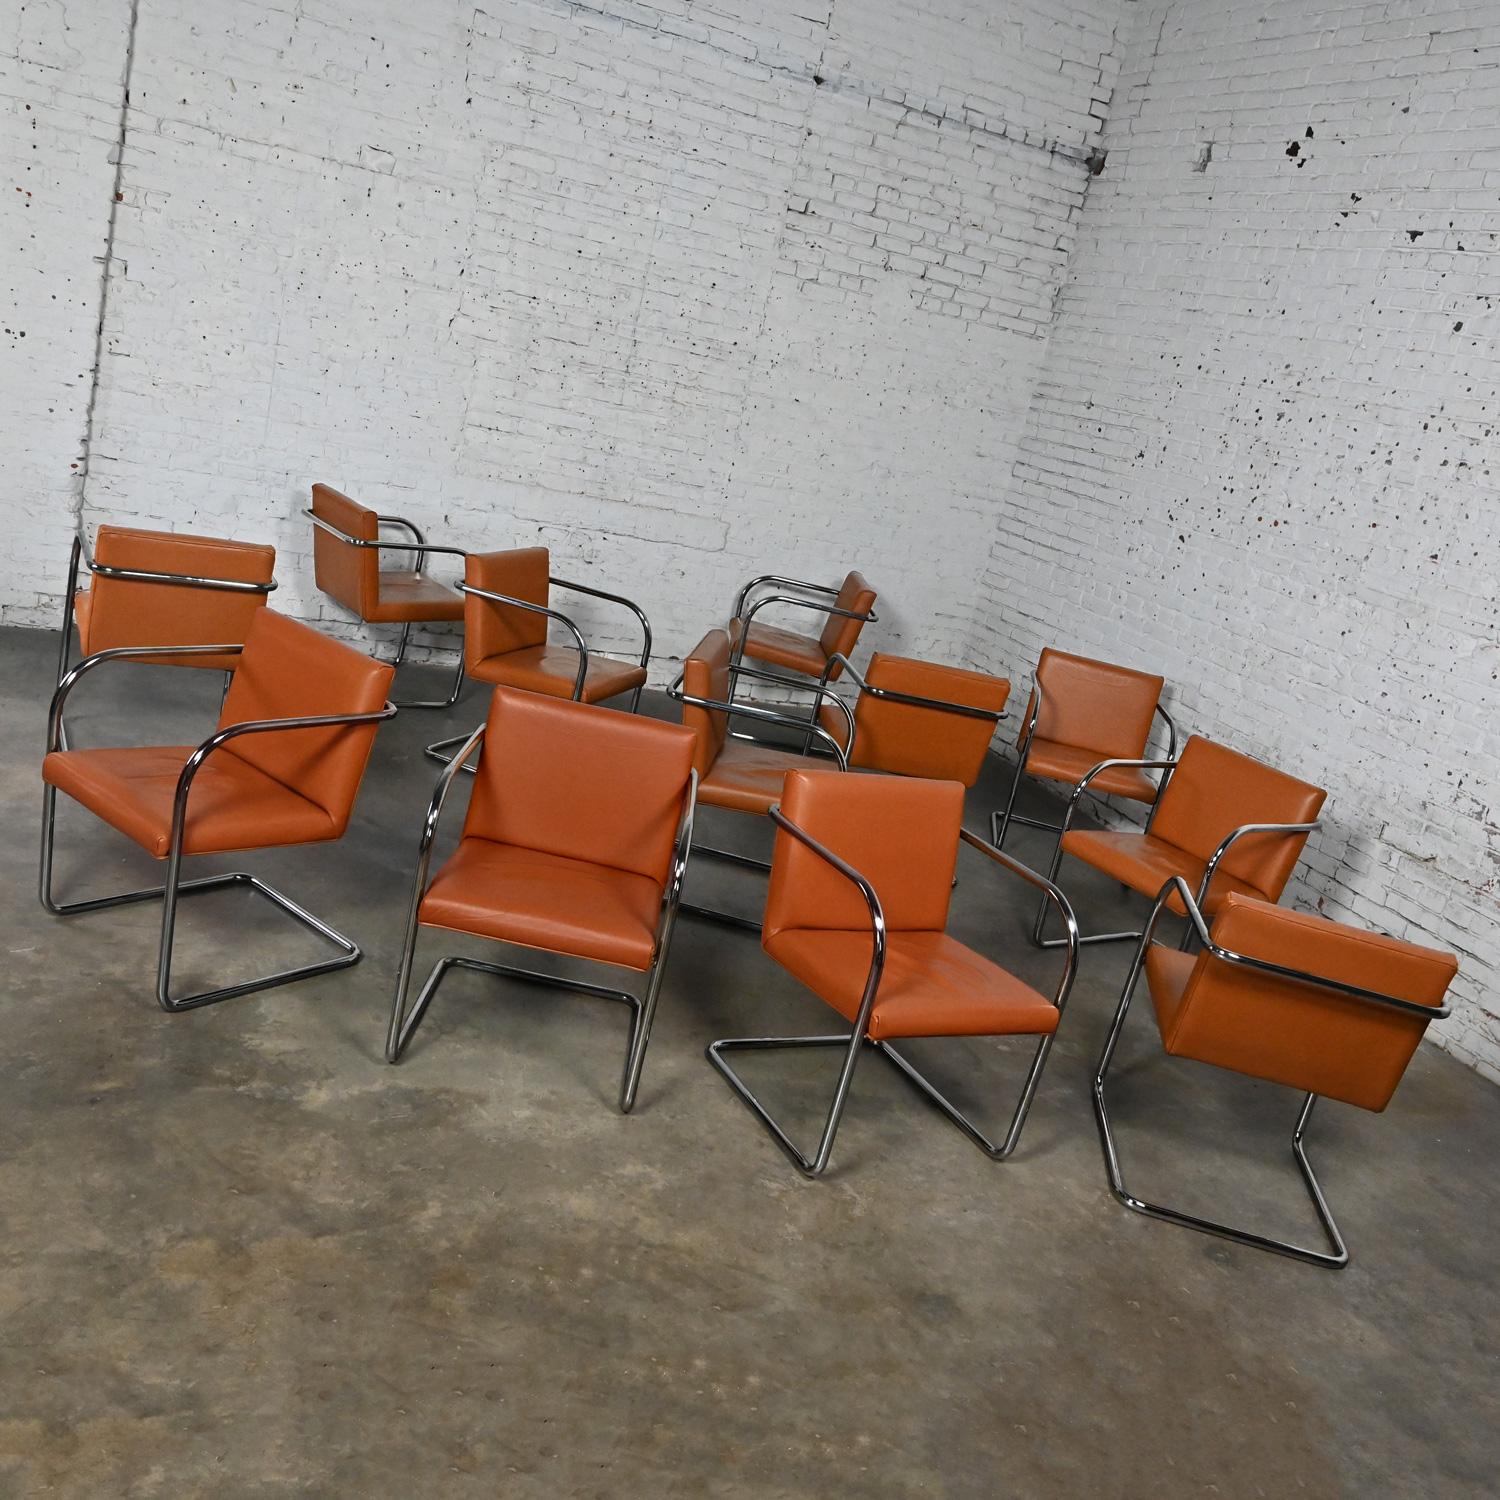 Thonet Bauhaus Brno Style Chairs Chrome & Cognac Leather Cantilever Set of 12  In Good Condition For Sale In Topeka, KS